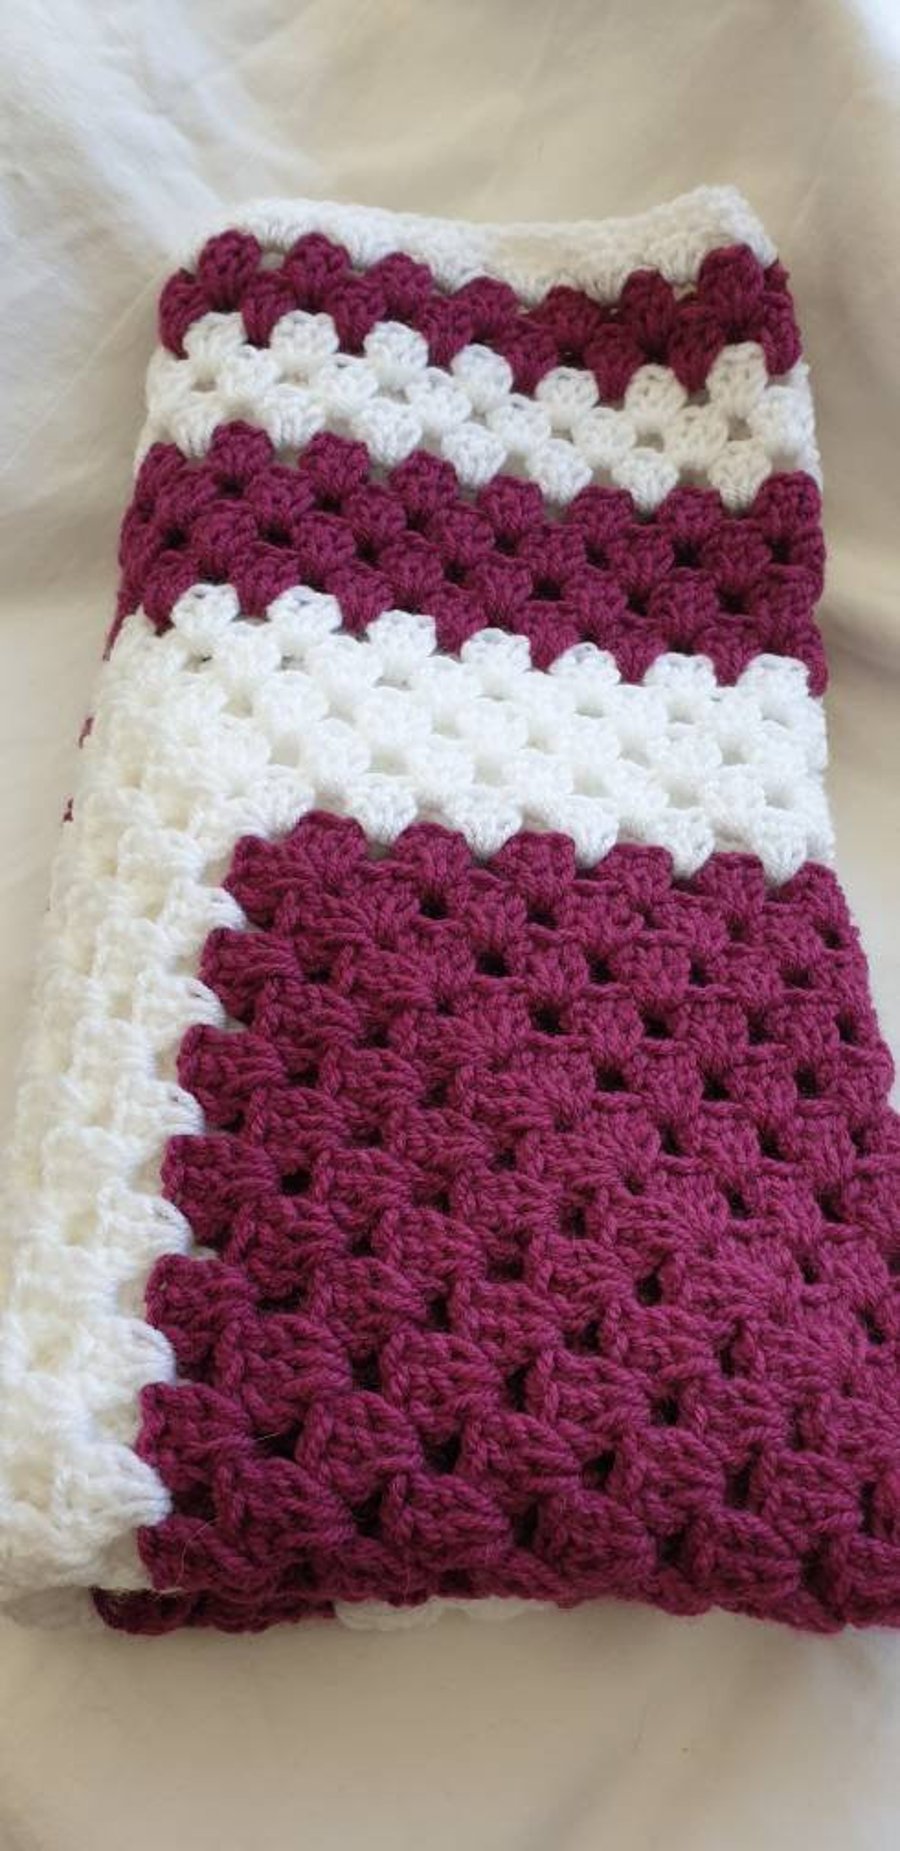 Purple and white granny square crocheted baby blanket